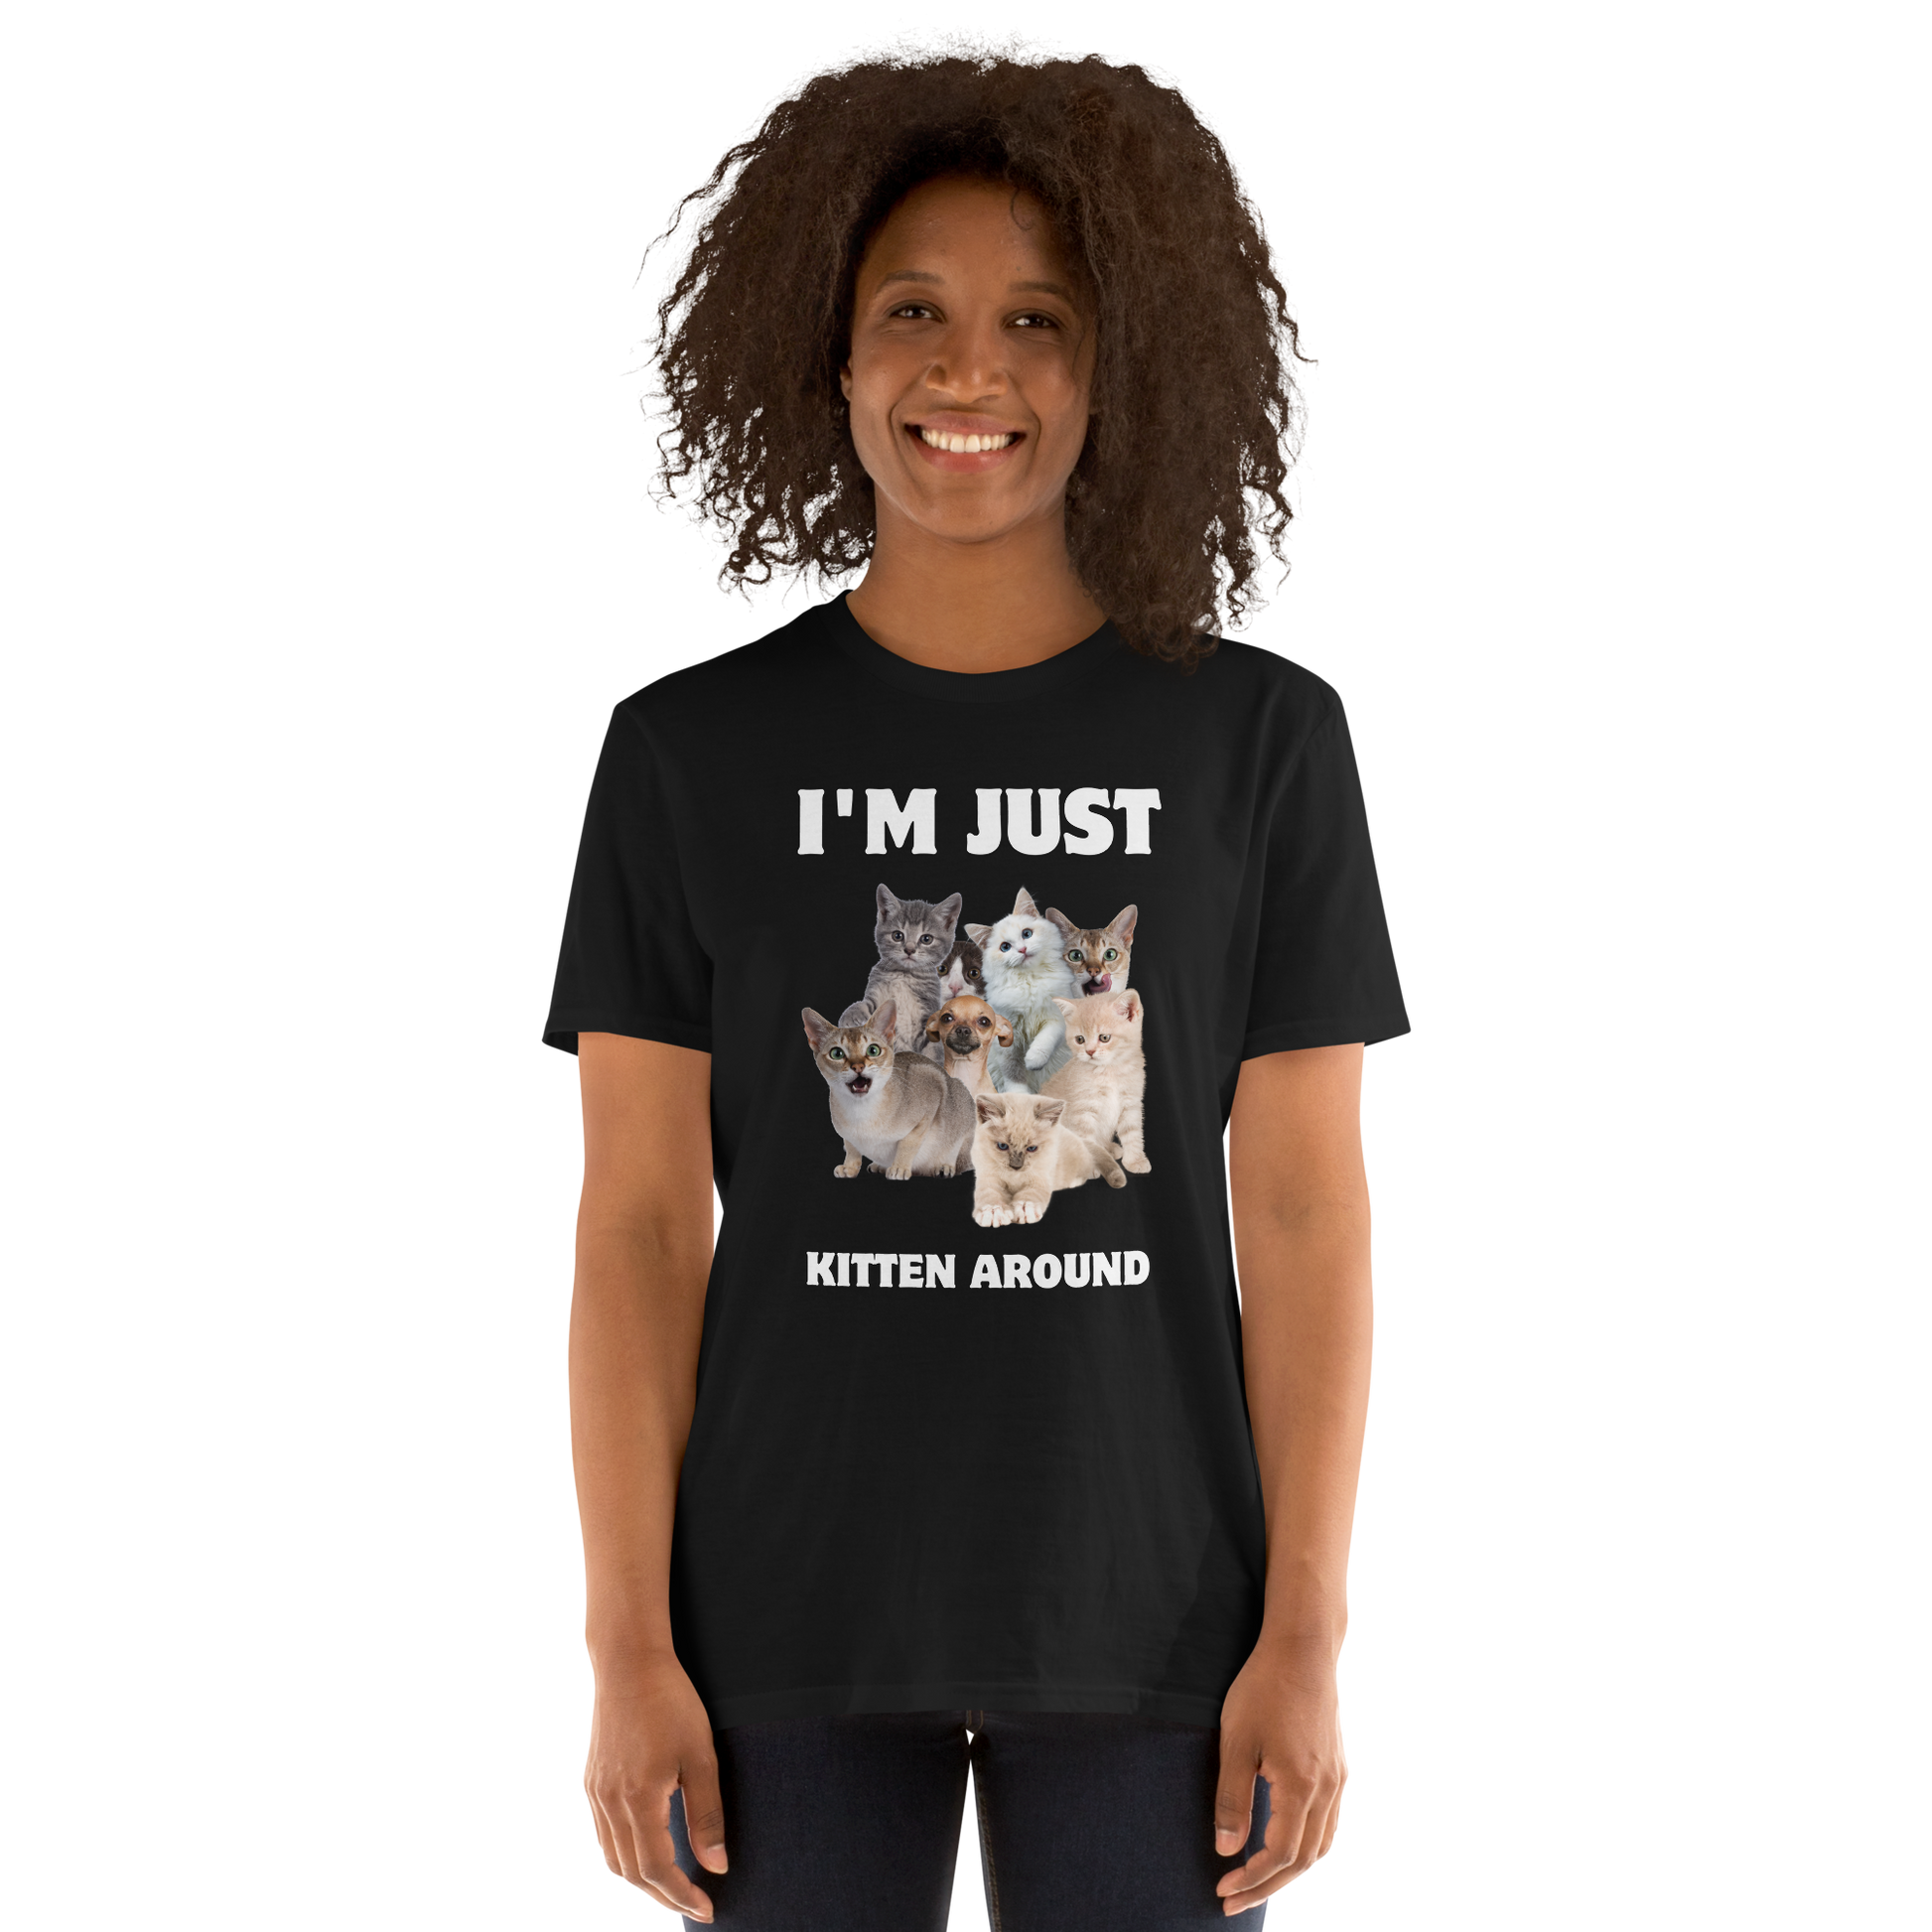 Woman wearing a Black Cat T-Shirt featuring an I'm Just Kitten Around graphic on the chest - Funny Graphic Cat T-shirts - Boozy Fox